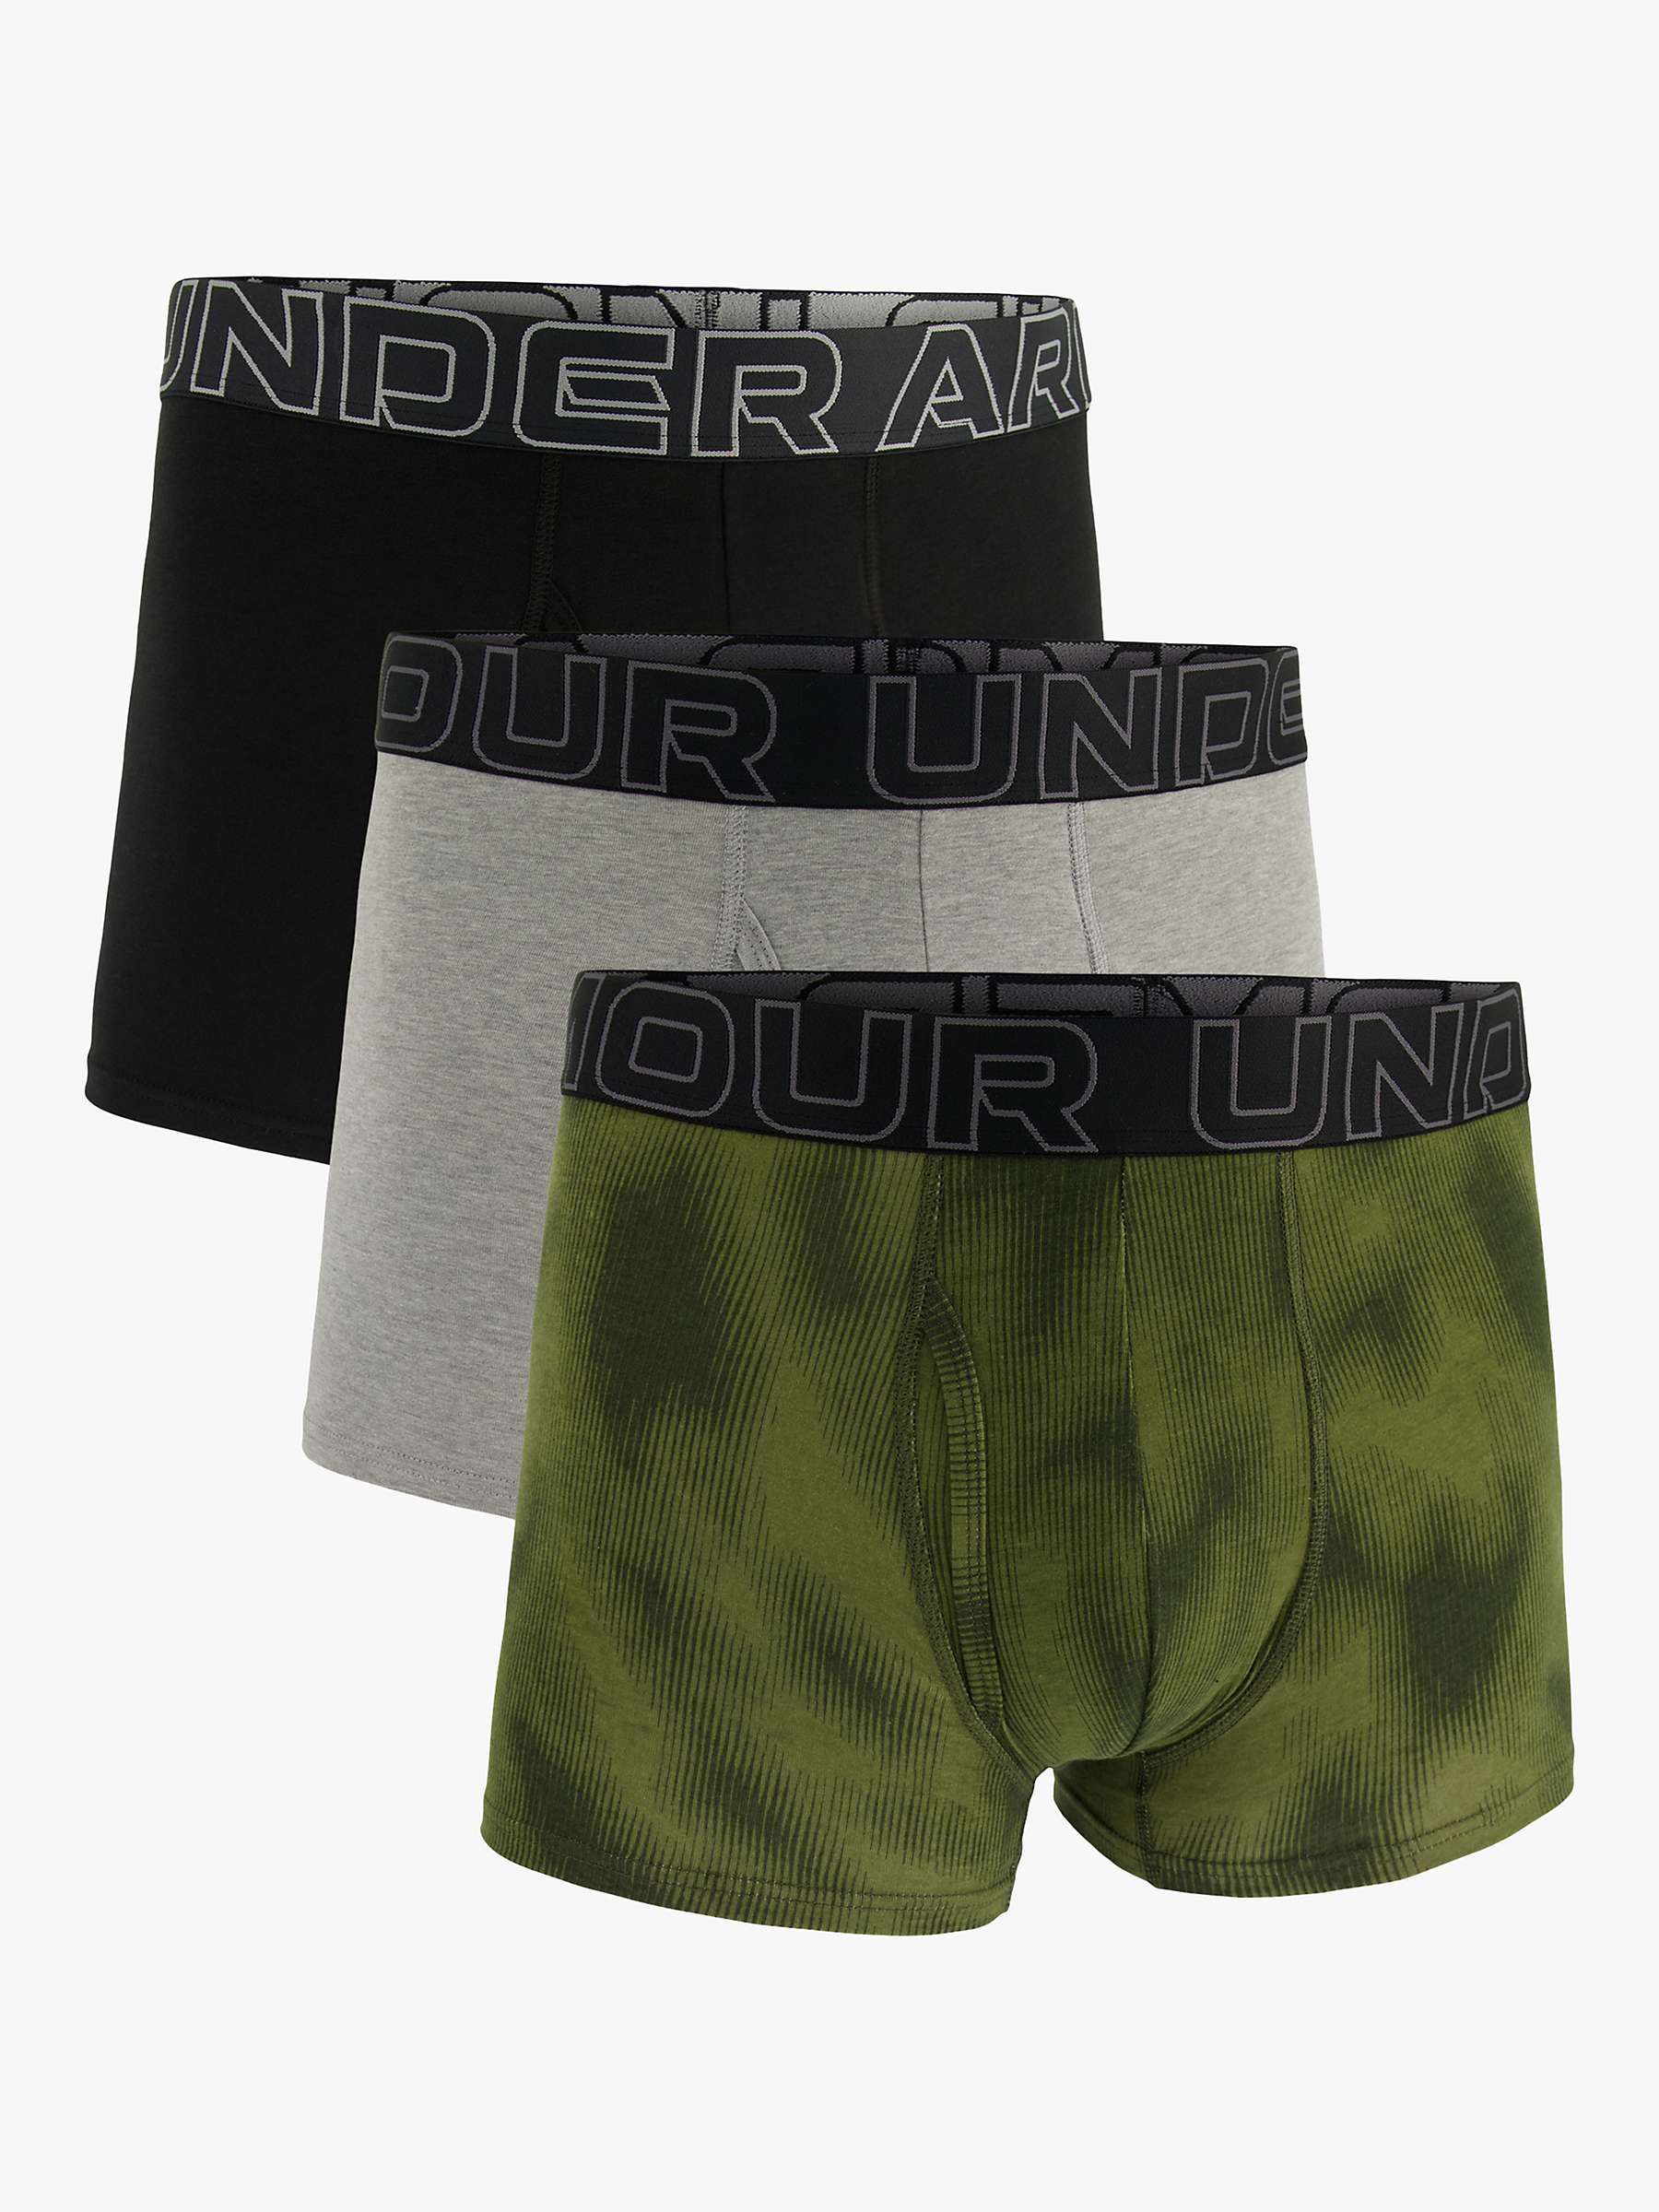 Buy Under Armour Performance Boxers, Pack of 3, Multi Online at johnlewis.com